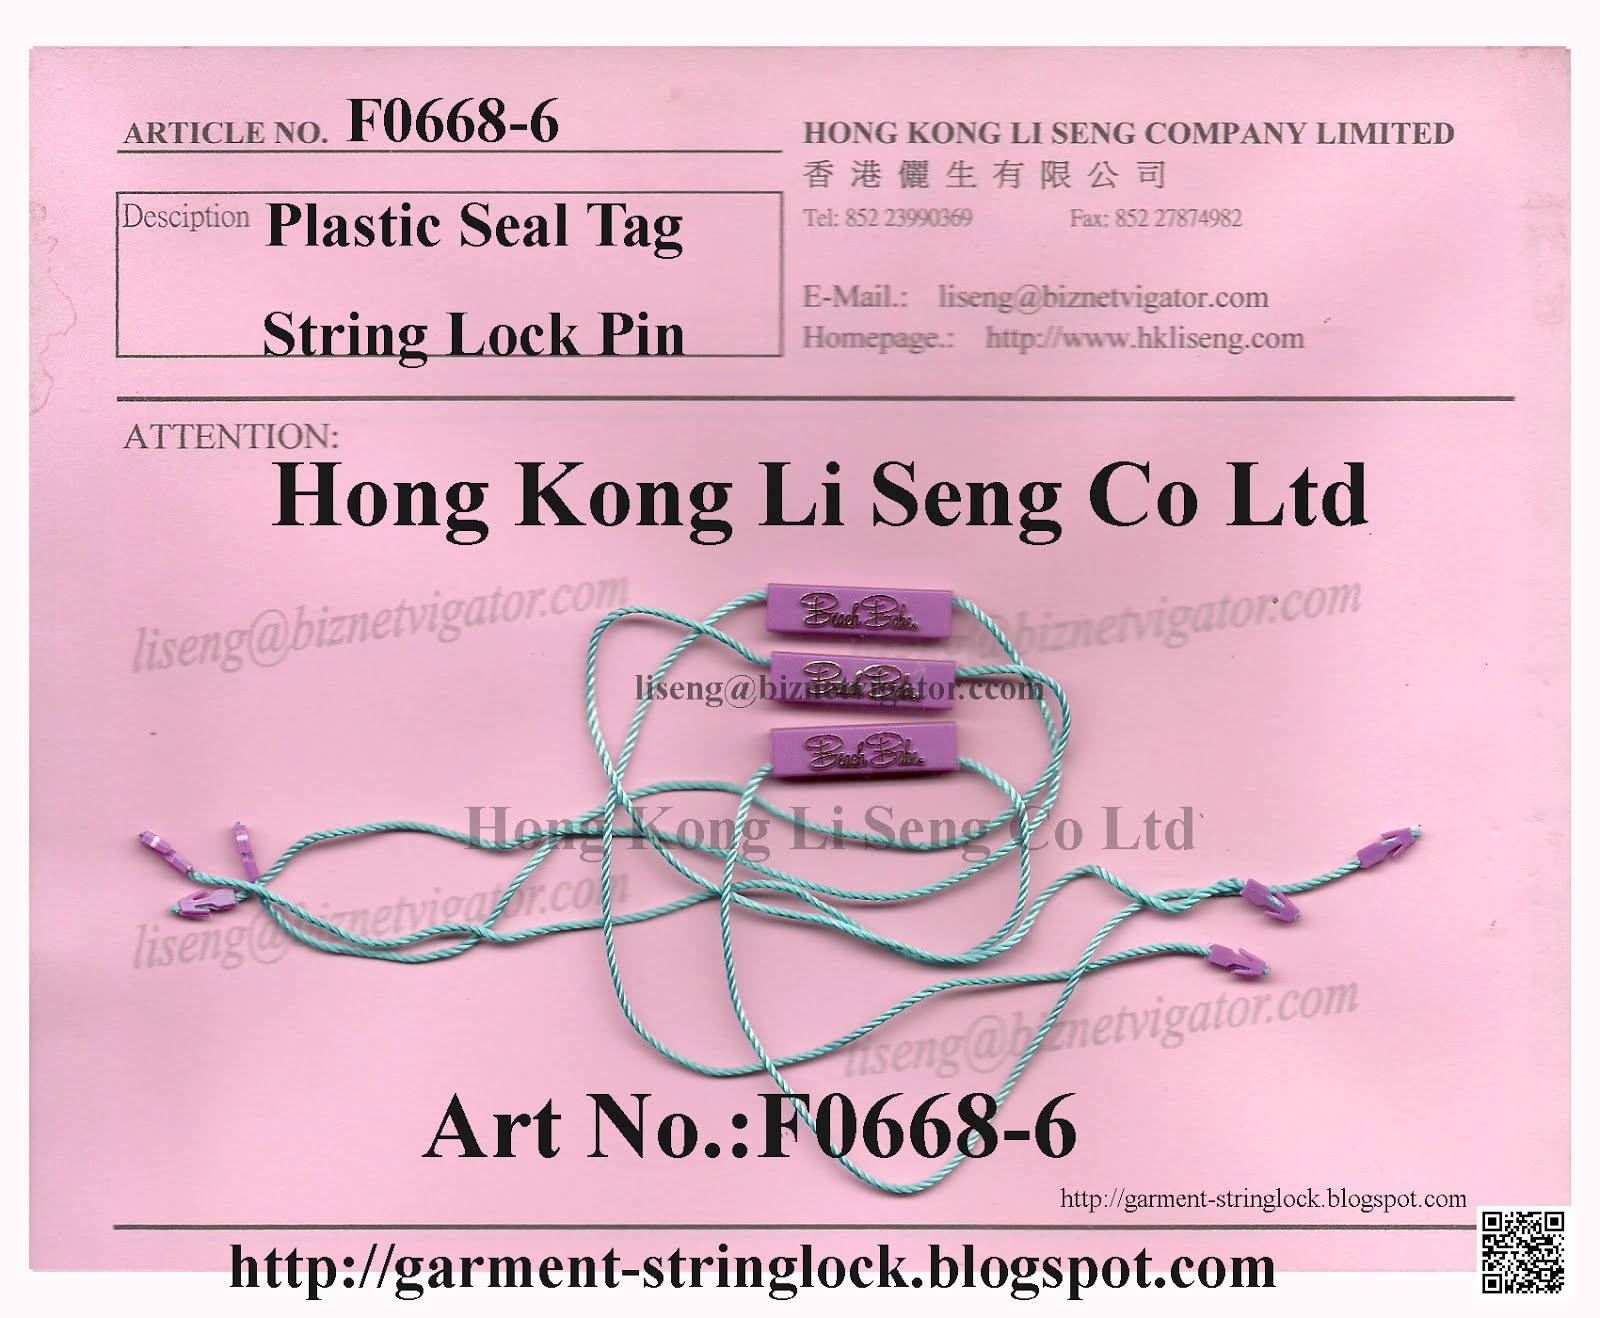 Your Own Plastic Seal Tag Brand Name Trademark String Lock Pin